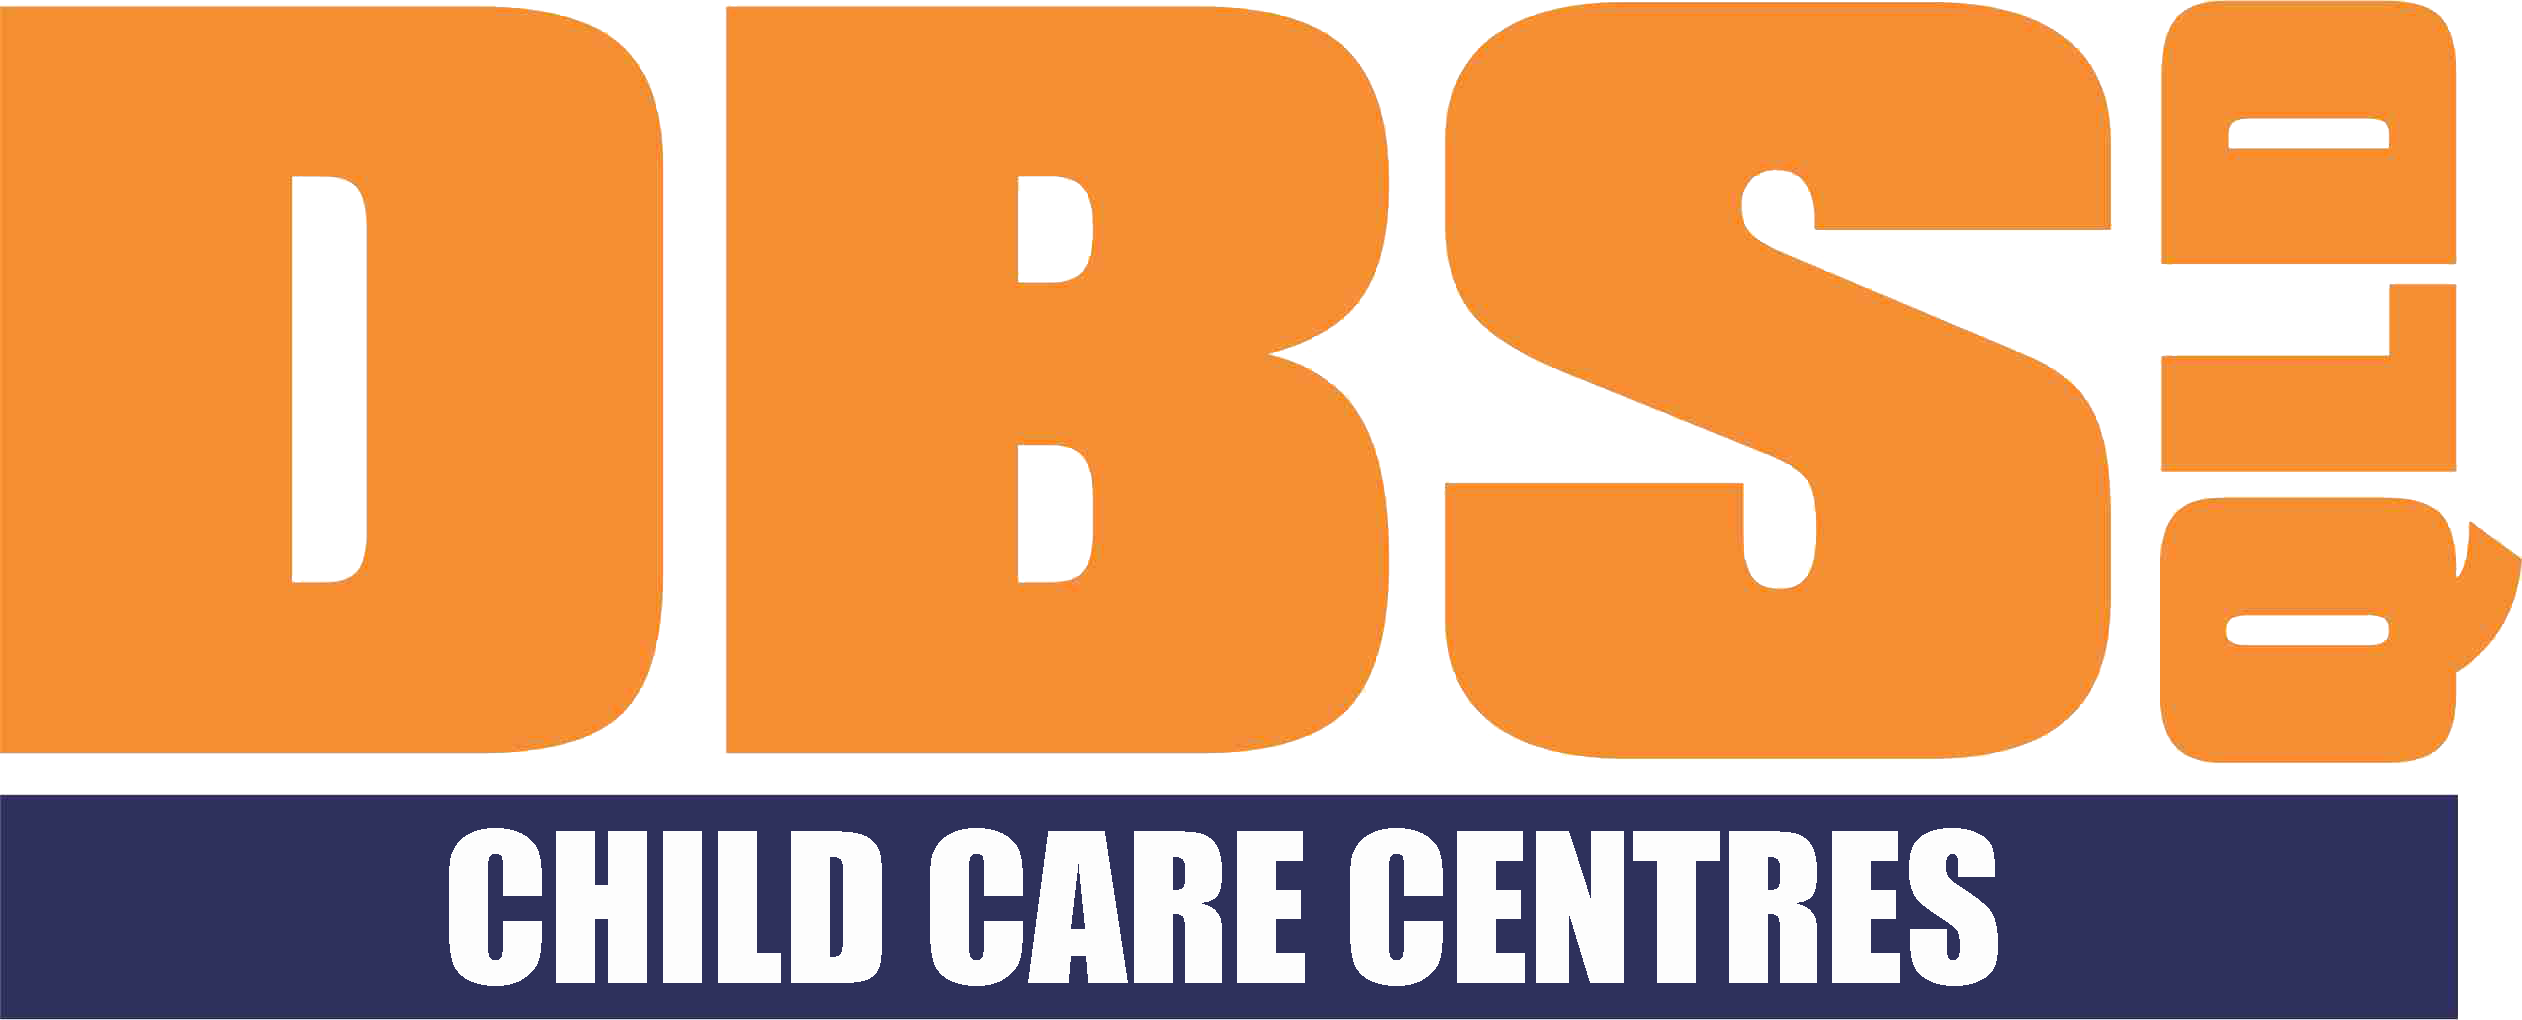 DBS Child Care Centres